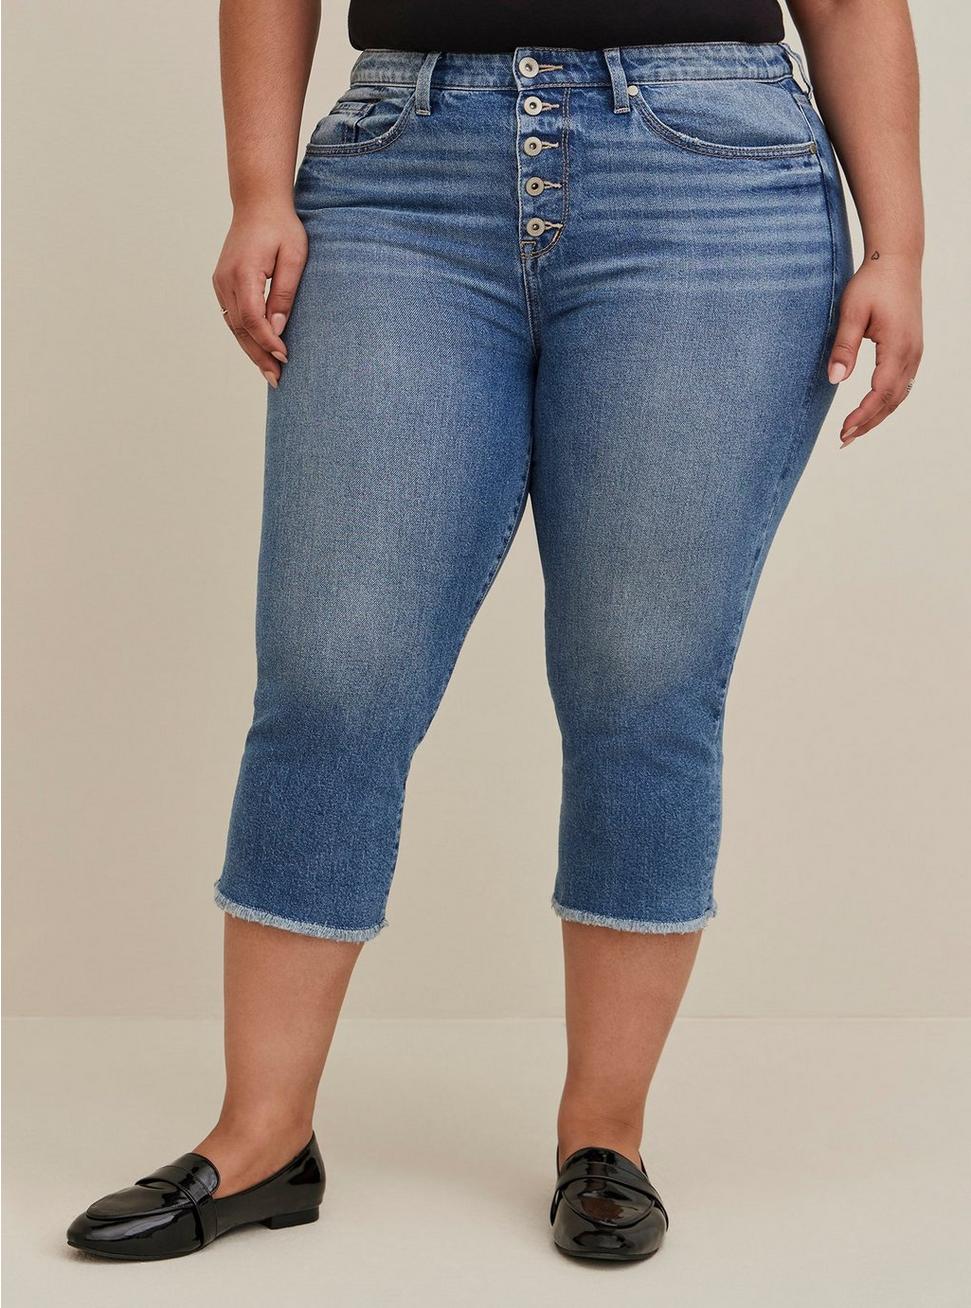 Crop Stovepipe Straight Classic Denim High-Rise Jean, ATTABOY, hi-res